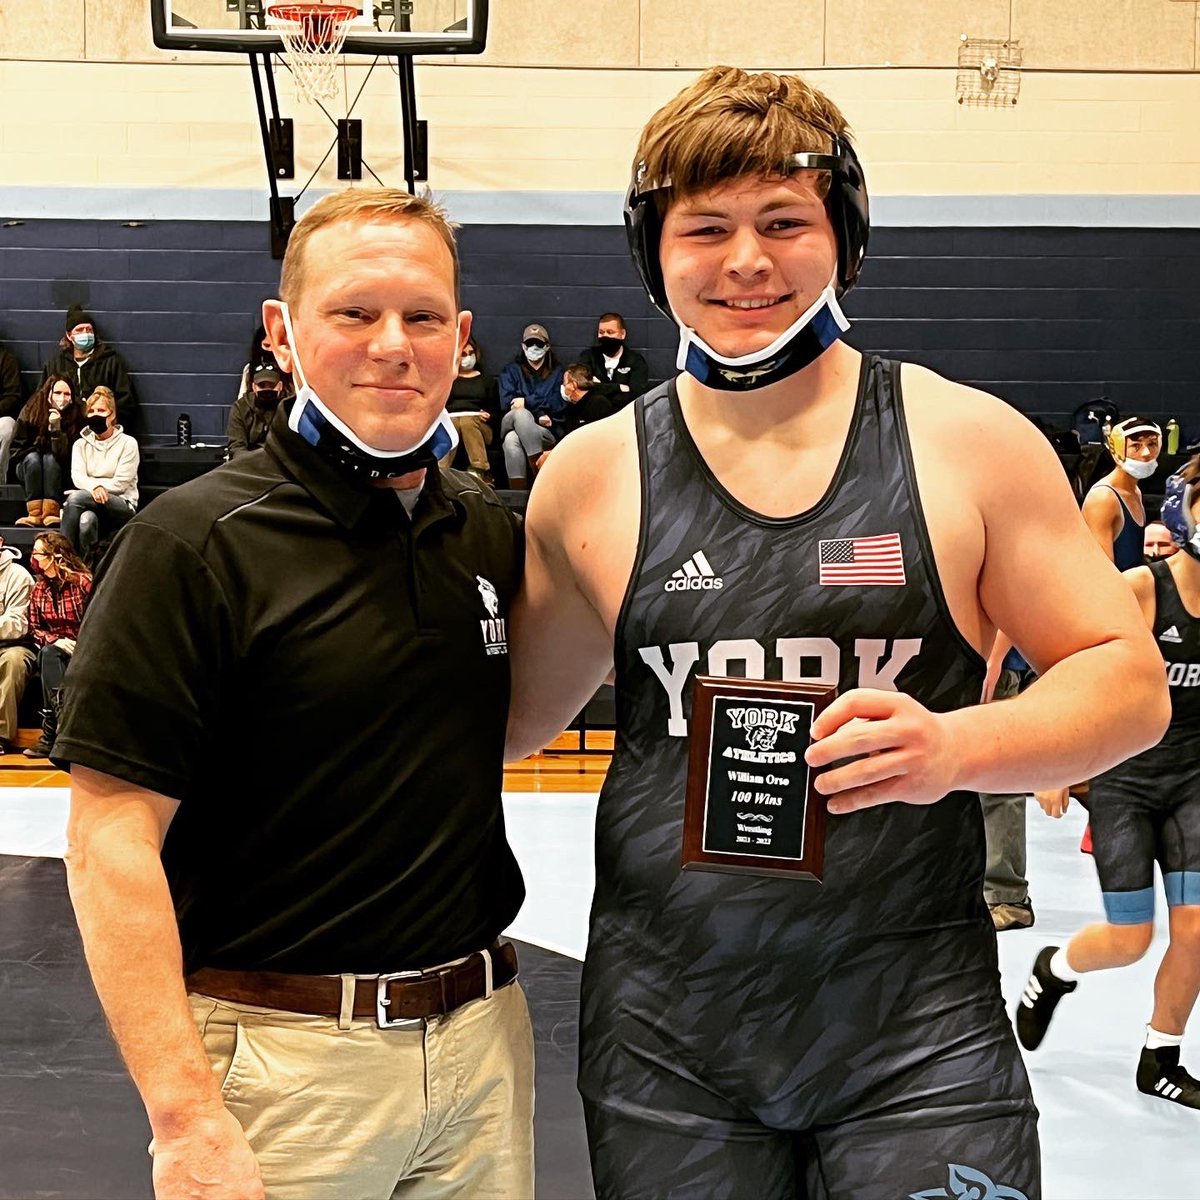 test Twitter Media - Congratulations to Senior Will Orso on his 100th career Wildcat Wrestling win! https://t.co/HHzAadr0Cy